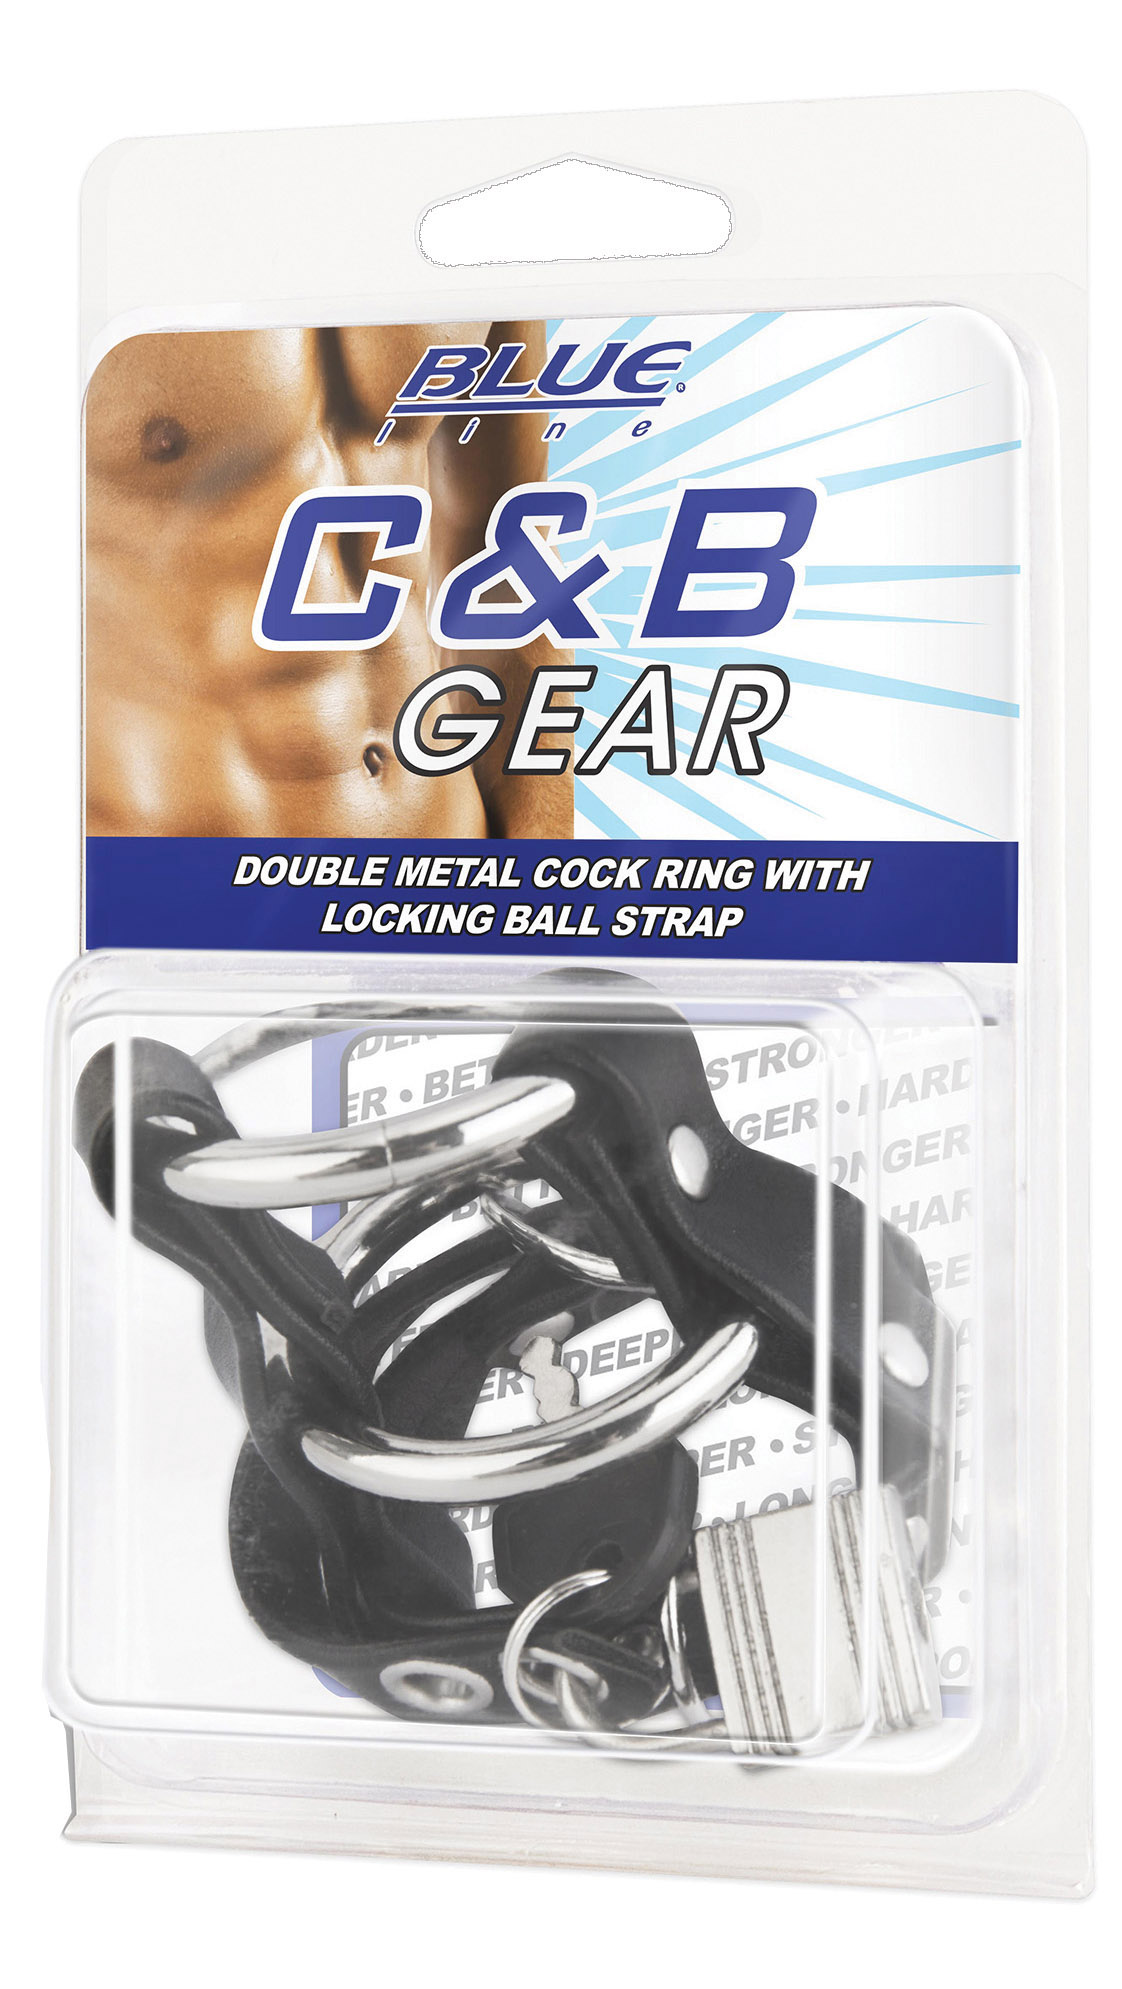 BLUE LINE C&B GEAR Double Metal Cock Ring With Locking Ball Strap